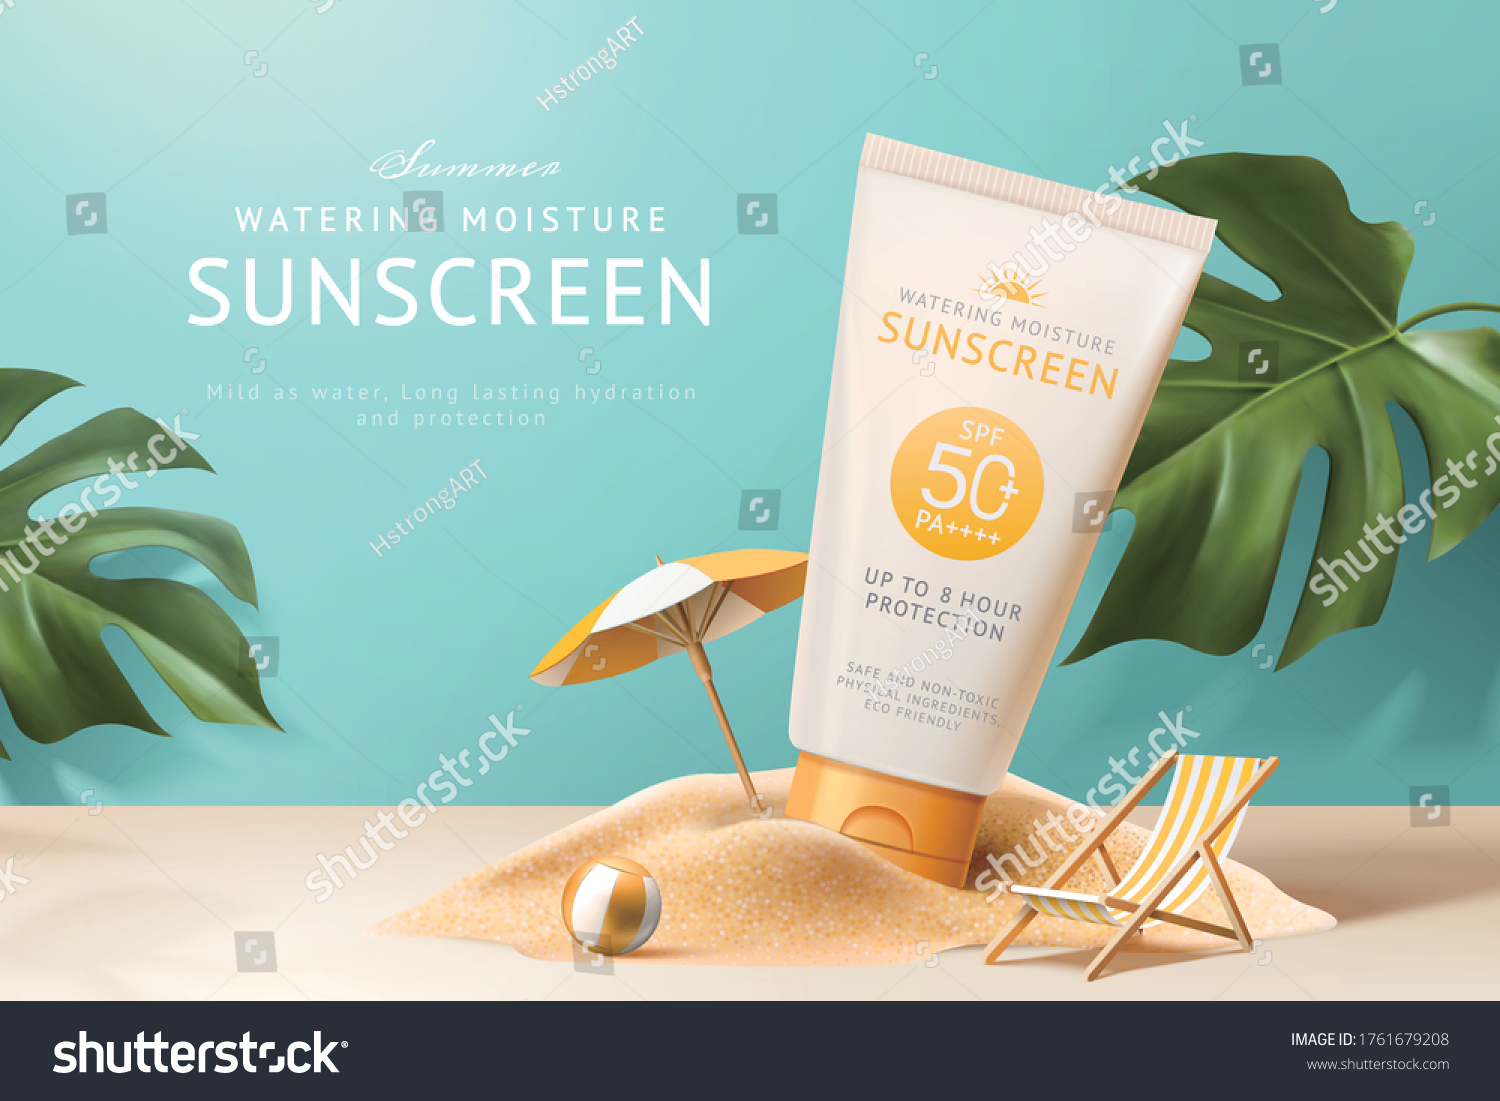 Ad template for summer products, sunscreen tube mock-up displayed on sand pile with monstera leaves, 3d illustration #1761679208